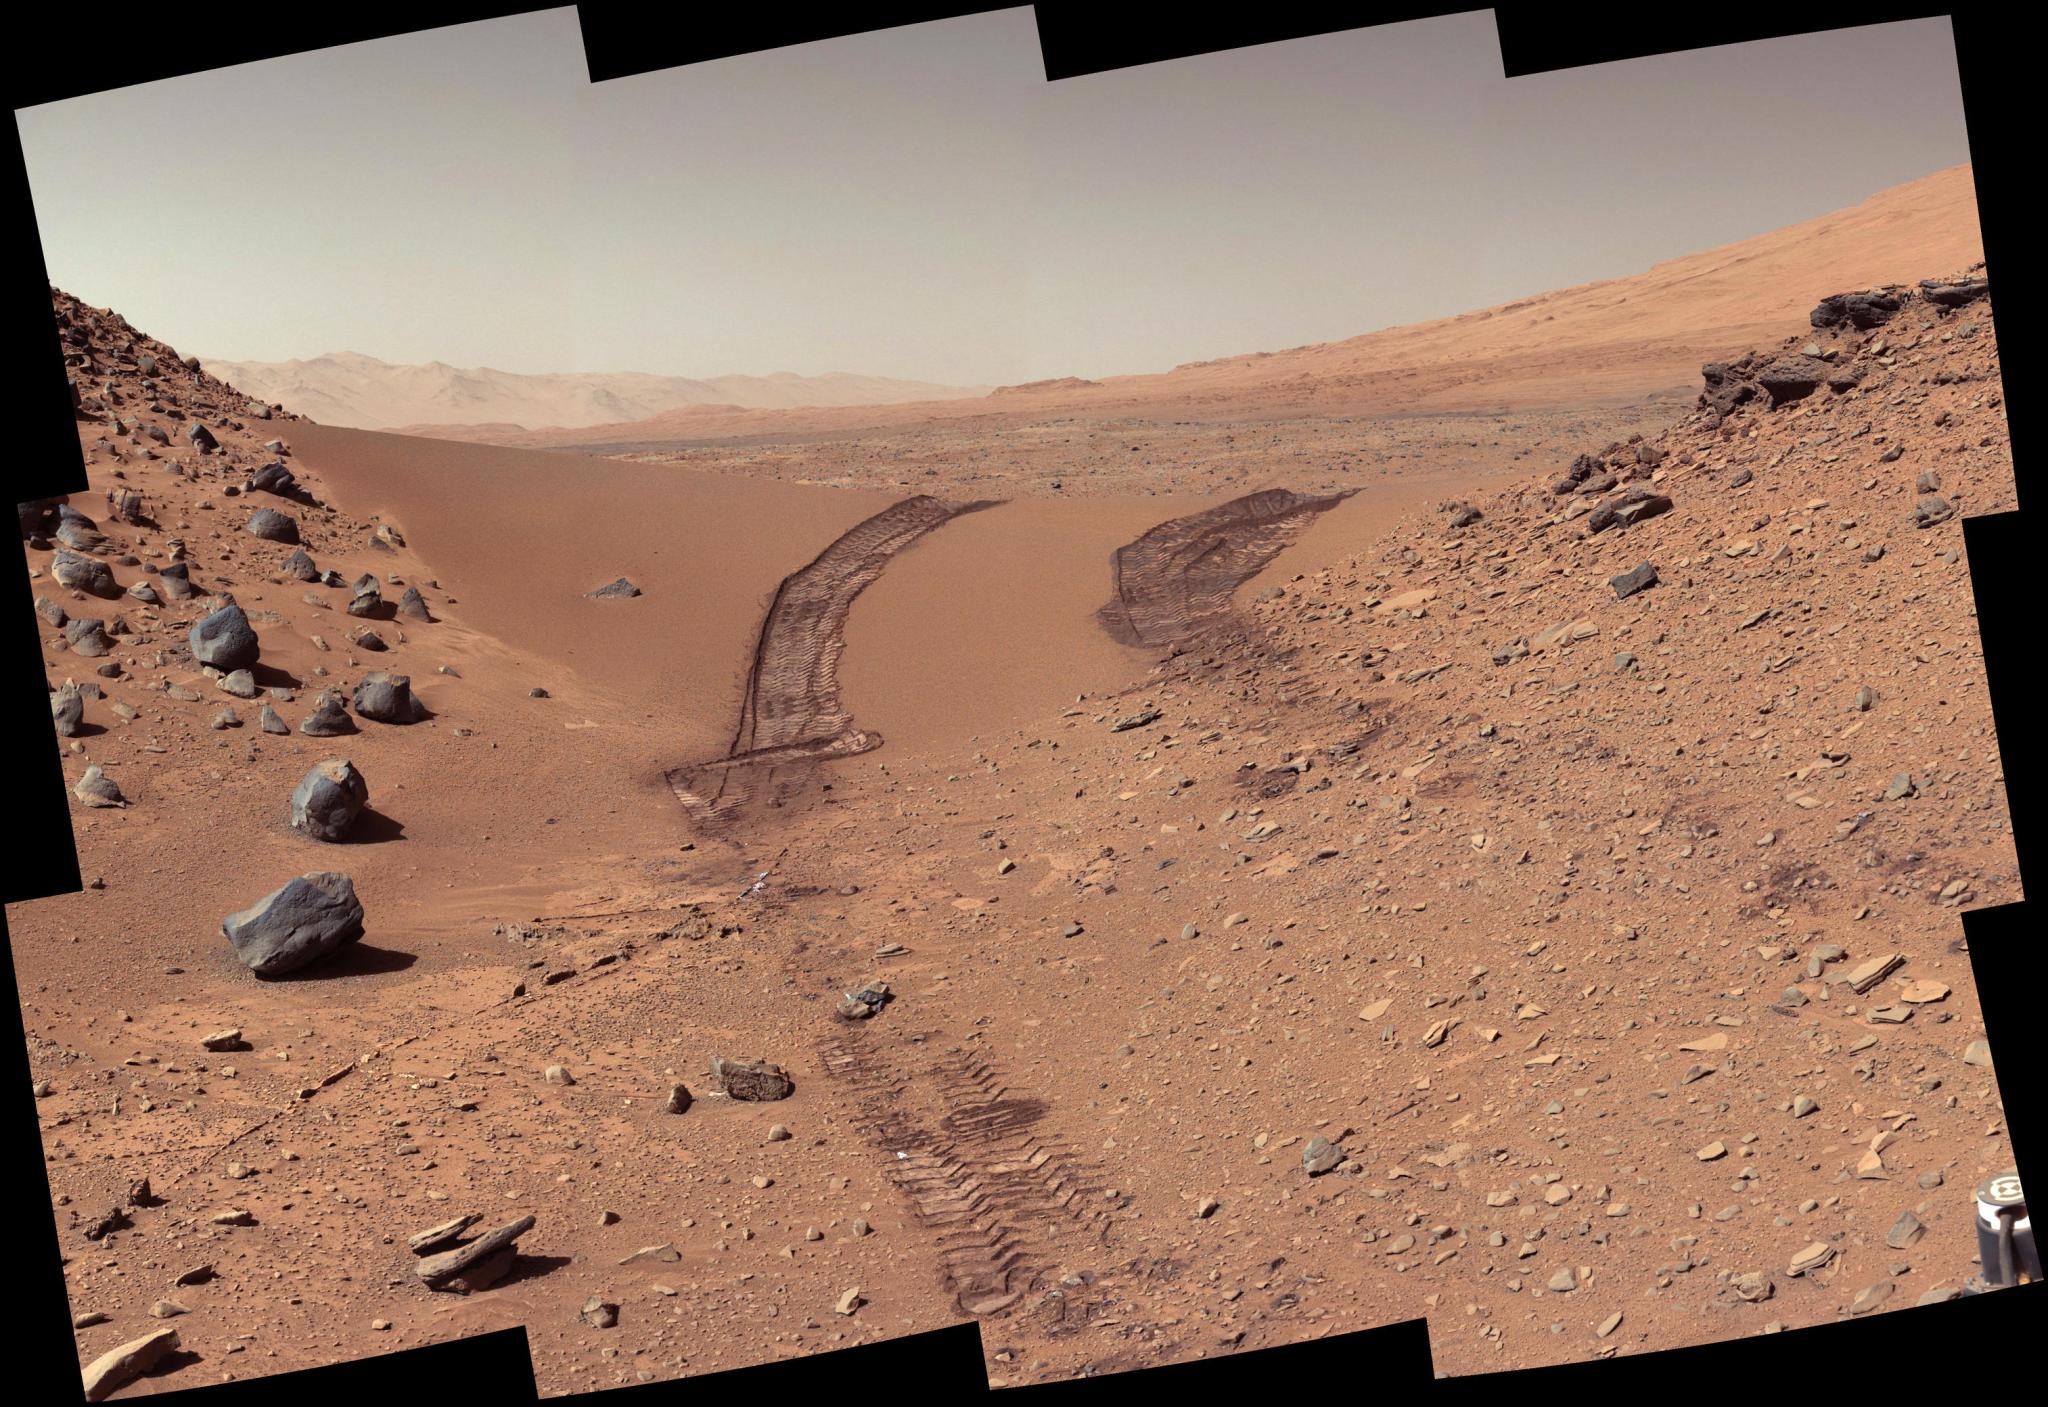 Image of Curiosity rover's wheel track prints on Martian dune